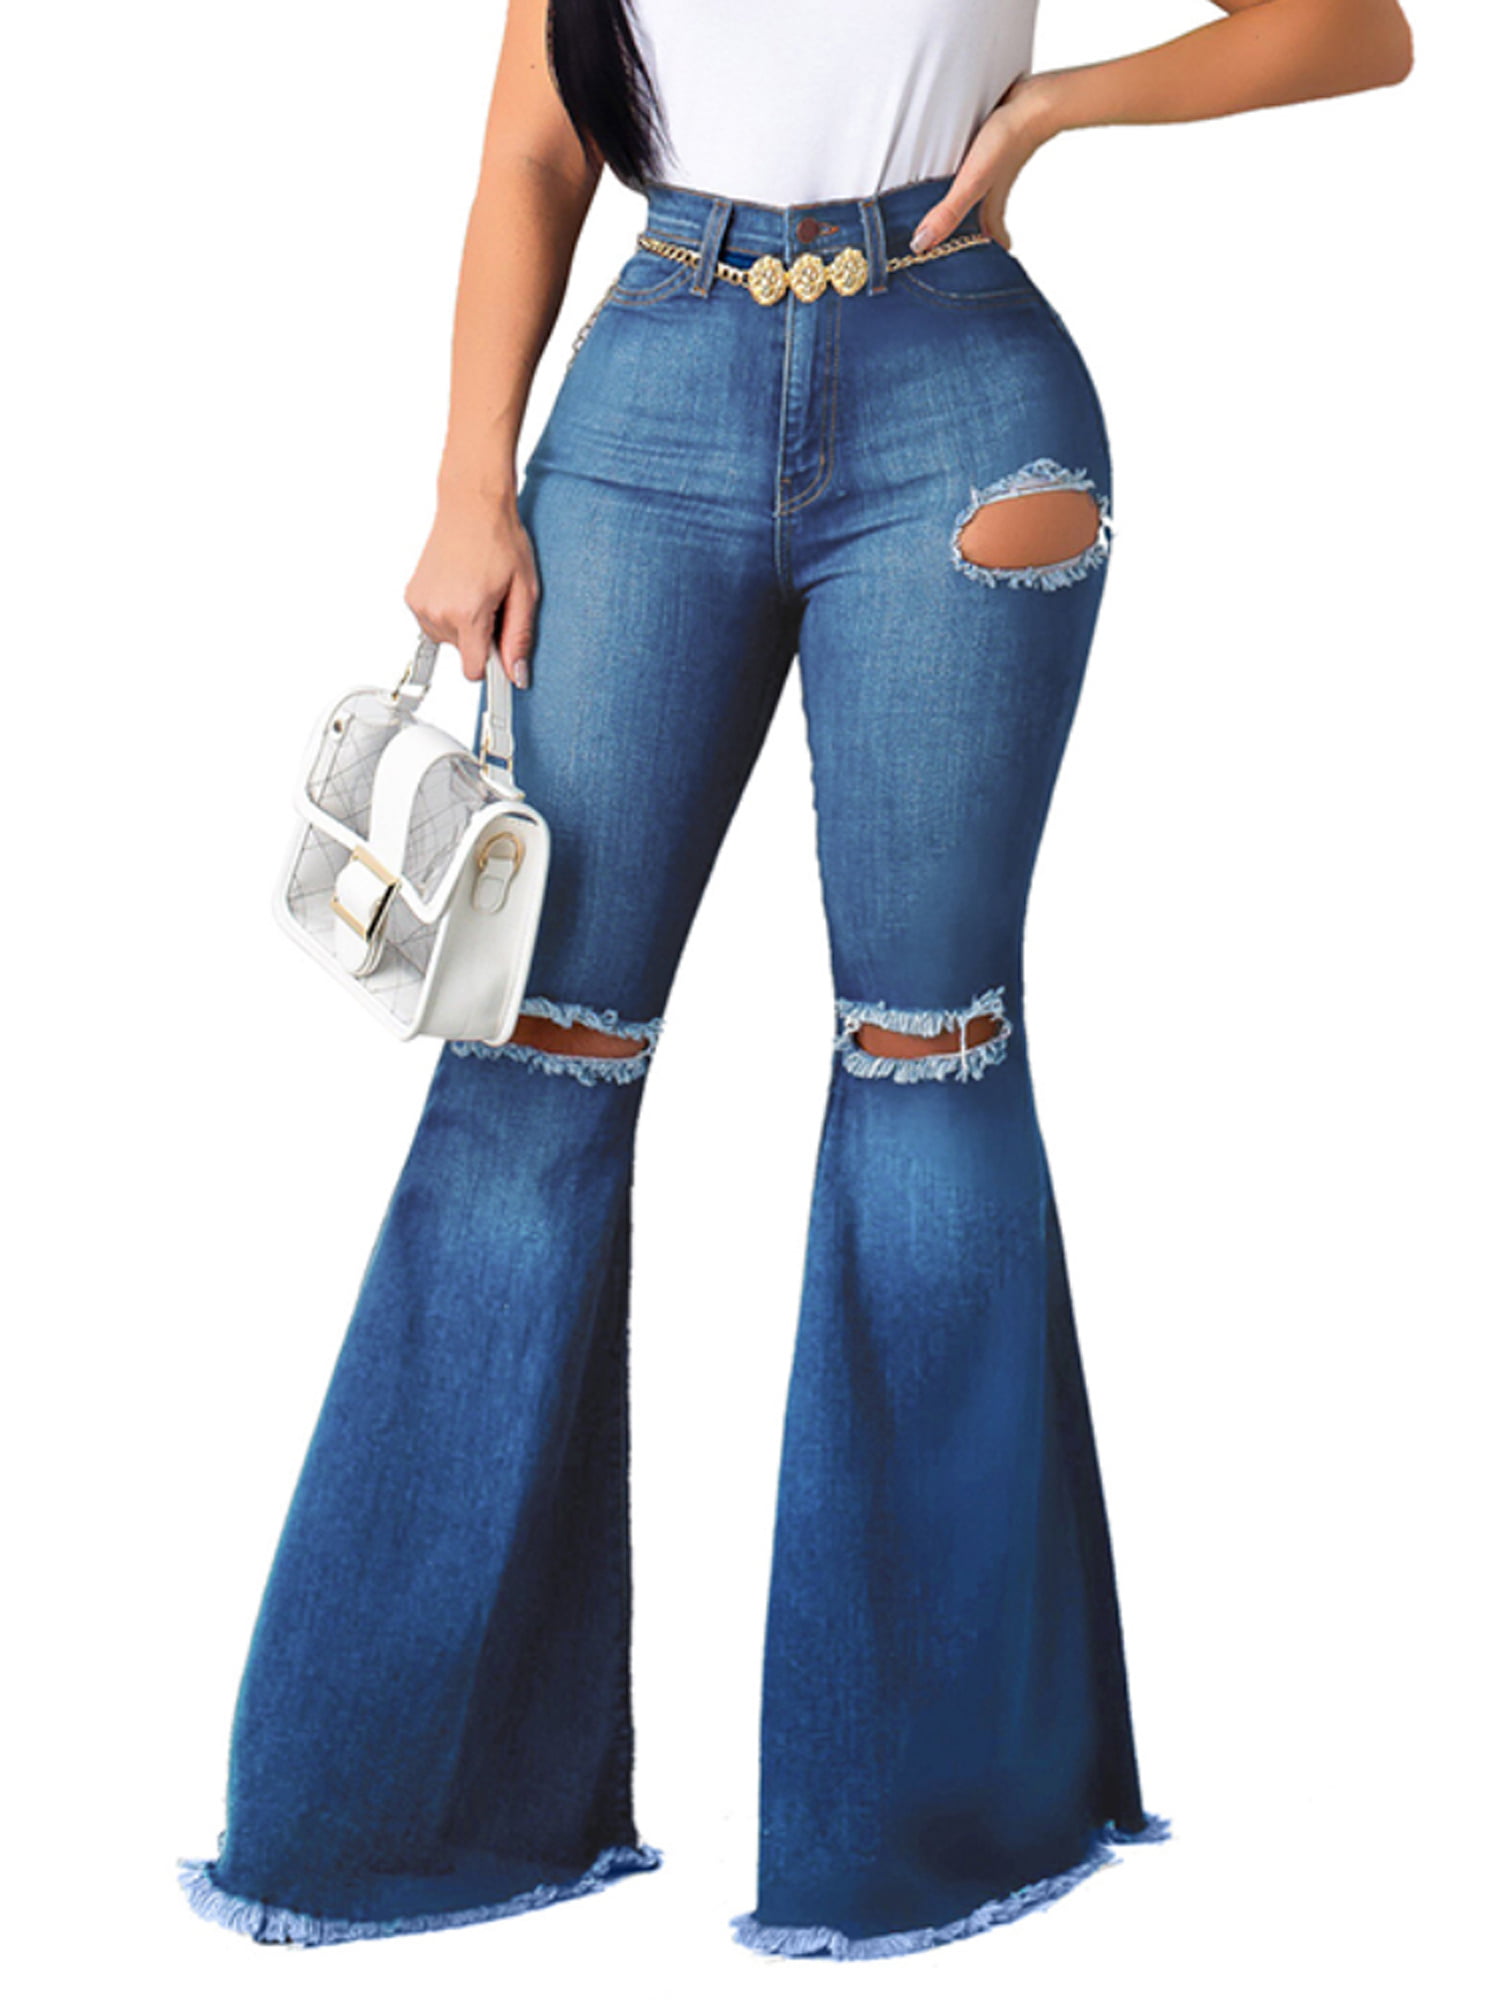 Womens Casual Jeans Stretch Denim Long Pants Ladies Low Waist Flared Trousers US 